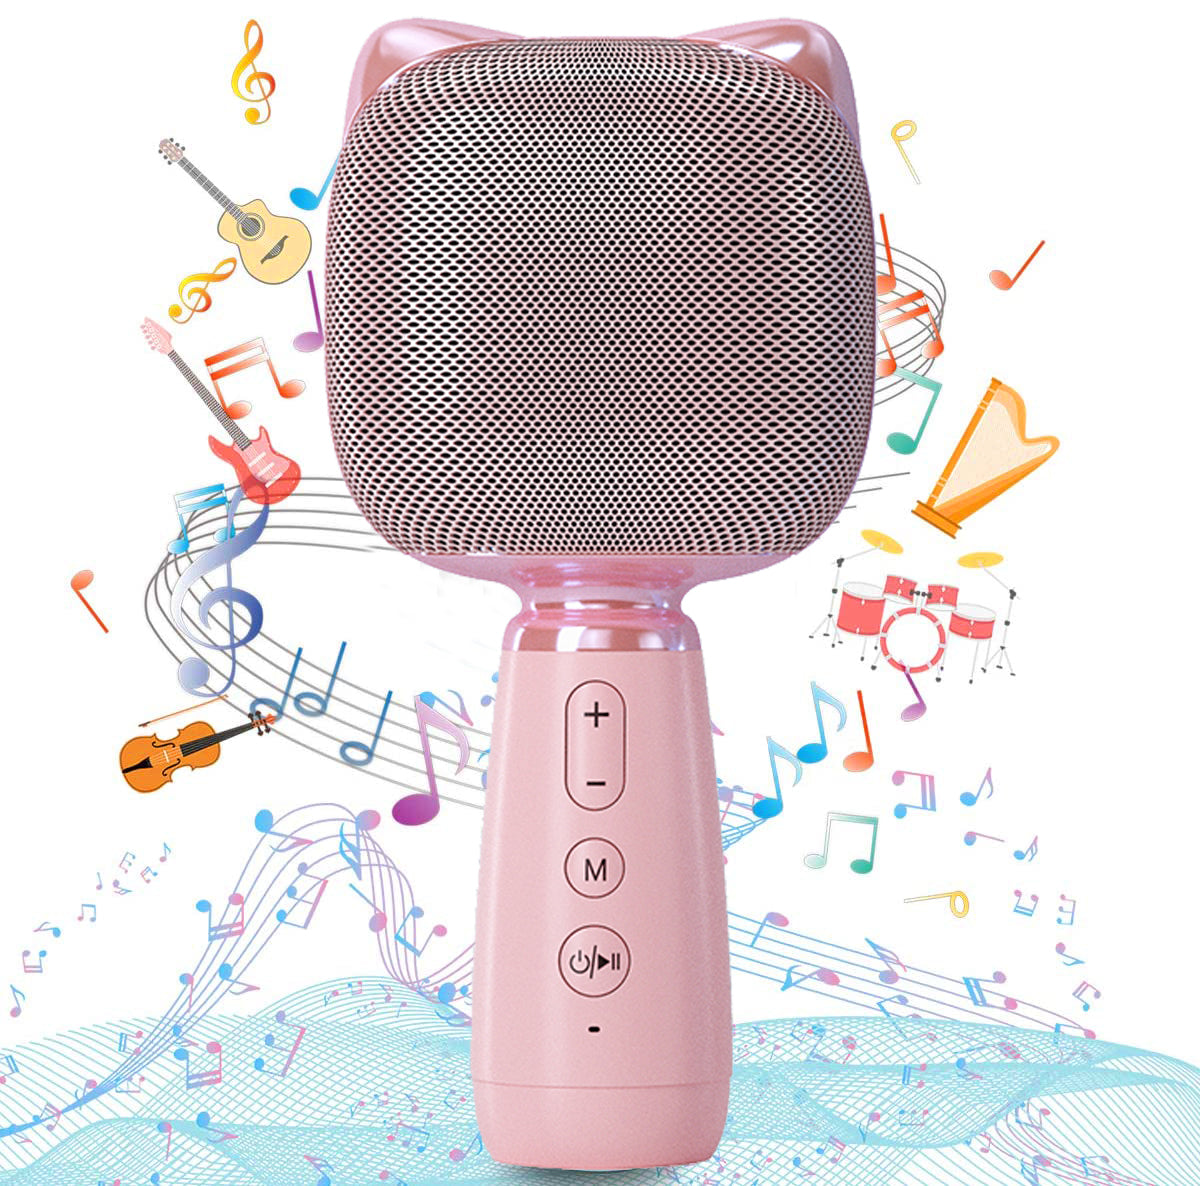 Wireless Microphone for Kids, Handheld Portable Karaoke Machine Speaker with Record Function, Christmas Gifts Toy for 3-12 Year Old Girls and Boys, Blue, LJ832